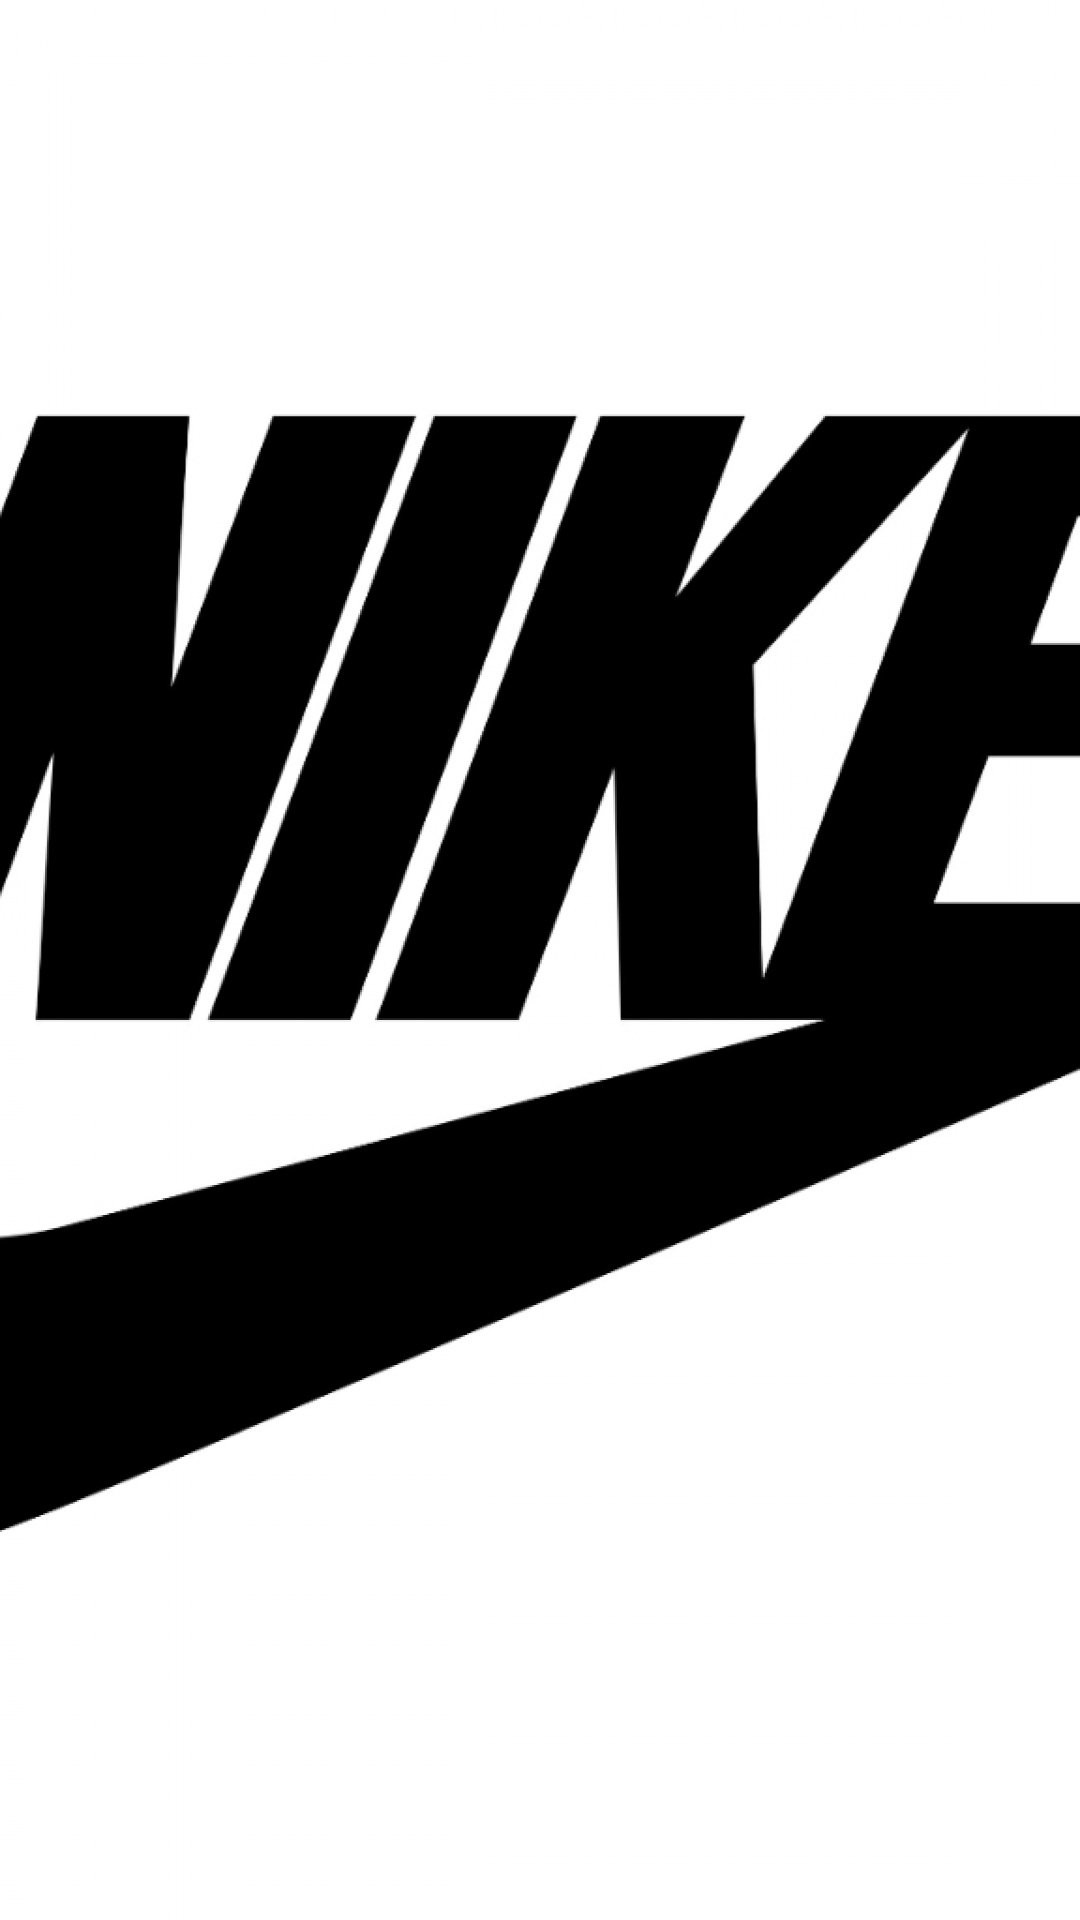 Nike Sb Wallpaper For Iphone 77 Images